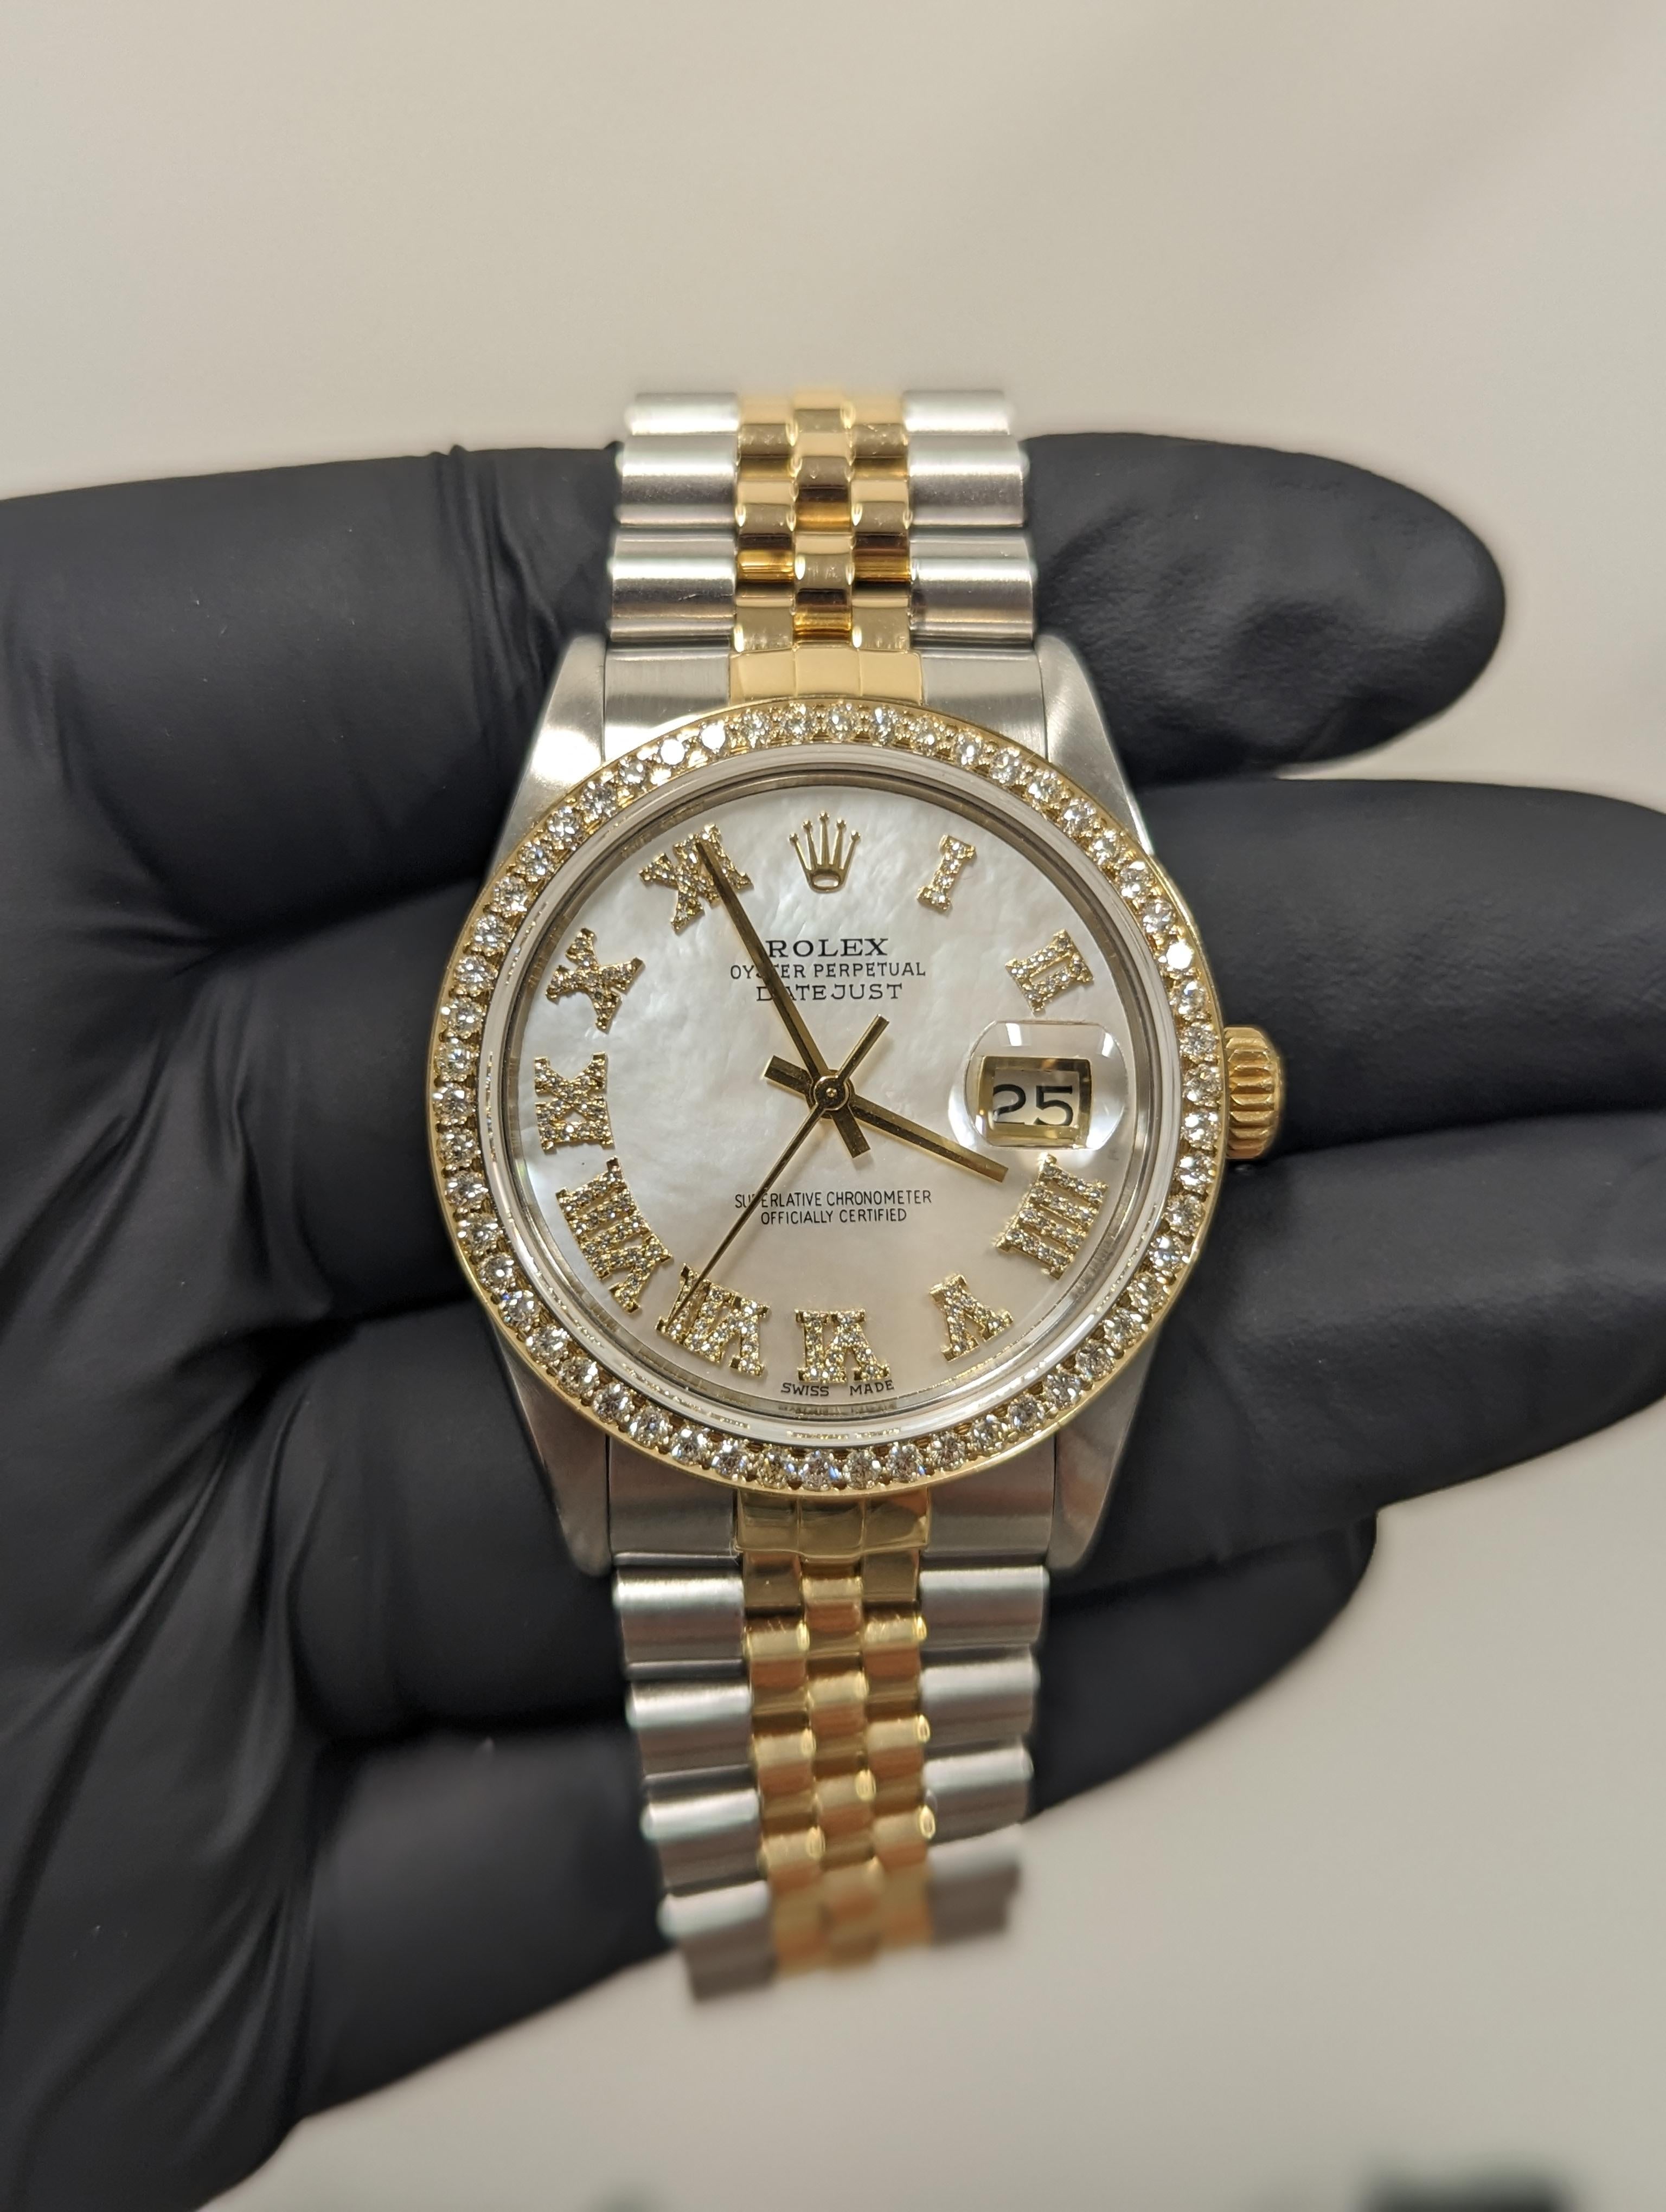 Swiss Wrist - SKU 16013-WMOP-FDR-BDS-JBL

Brand : Rolex
Model : Datejust Ref# 16013 - Plastic Quickset Model 
Gender : Mens
Metals : 14K Yellow Gold/ Stainless Steel
Case Size : 36 mm
Dial : Custom Mother Of Pearl Roman Diamond Dial (This dial is